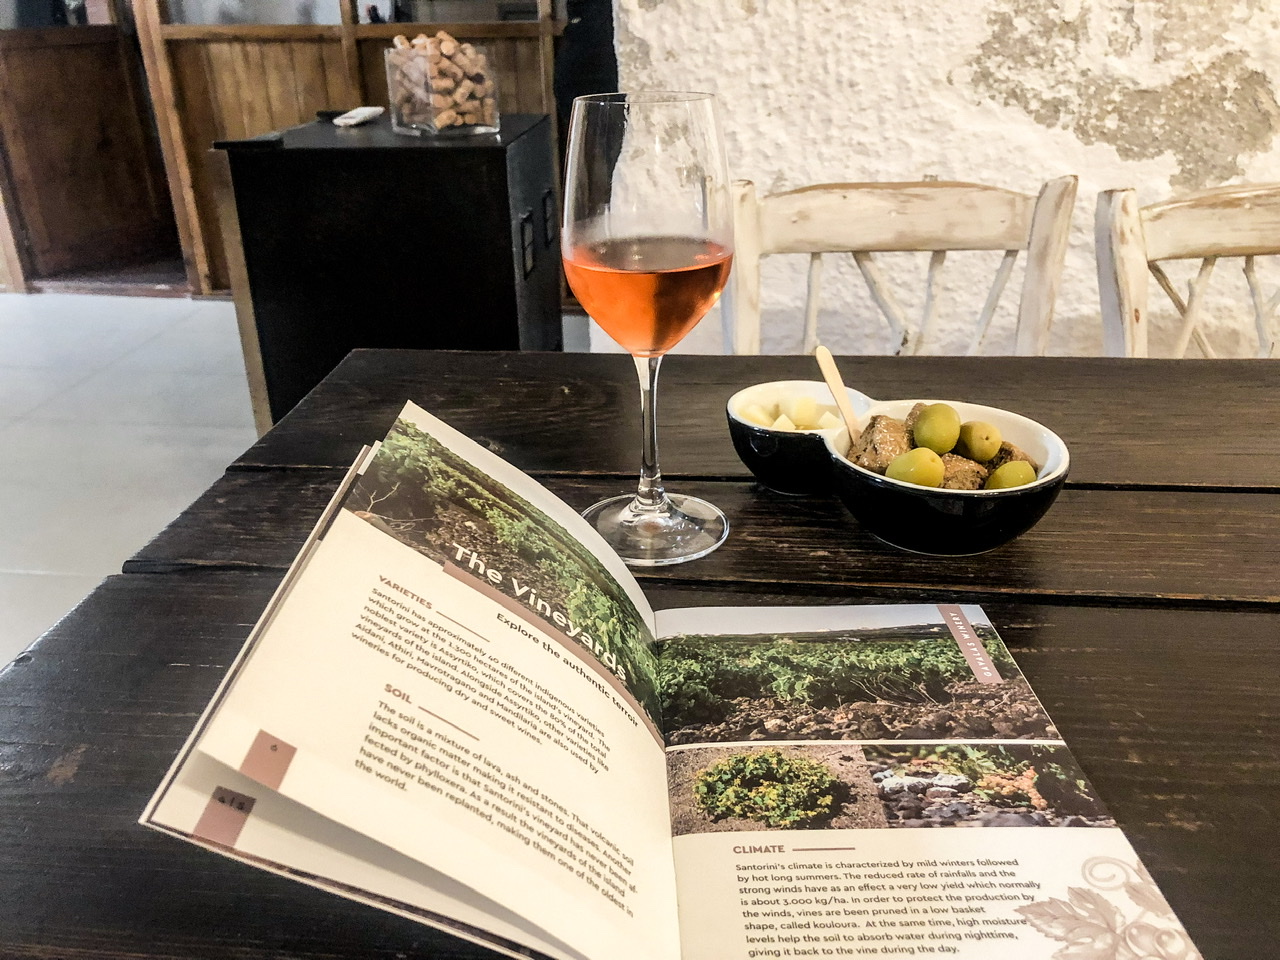 Tasting booklet, glass of rose wine and dish of olives and cheese on dark wood table